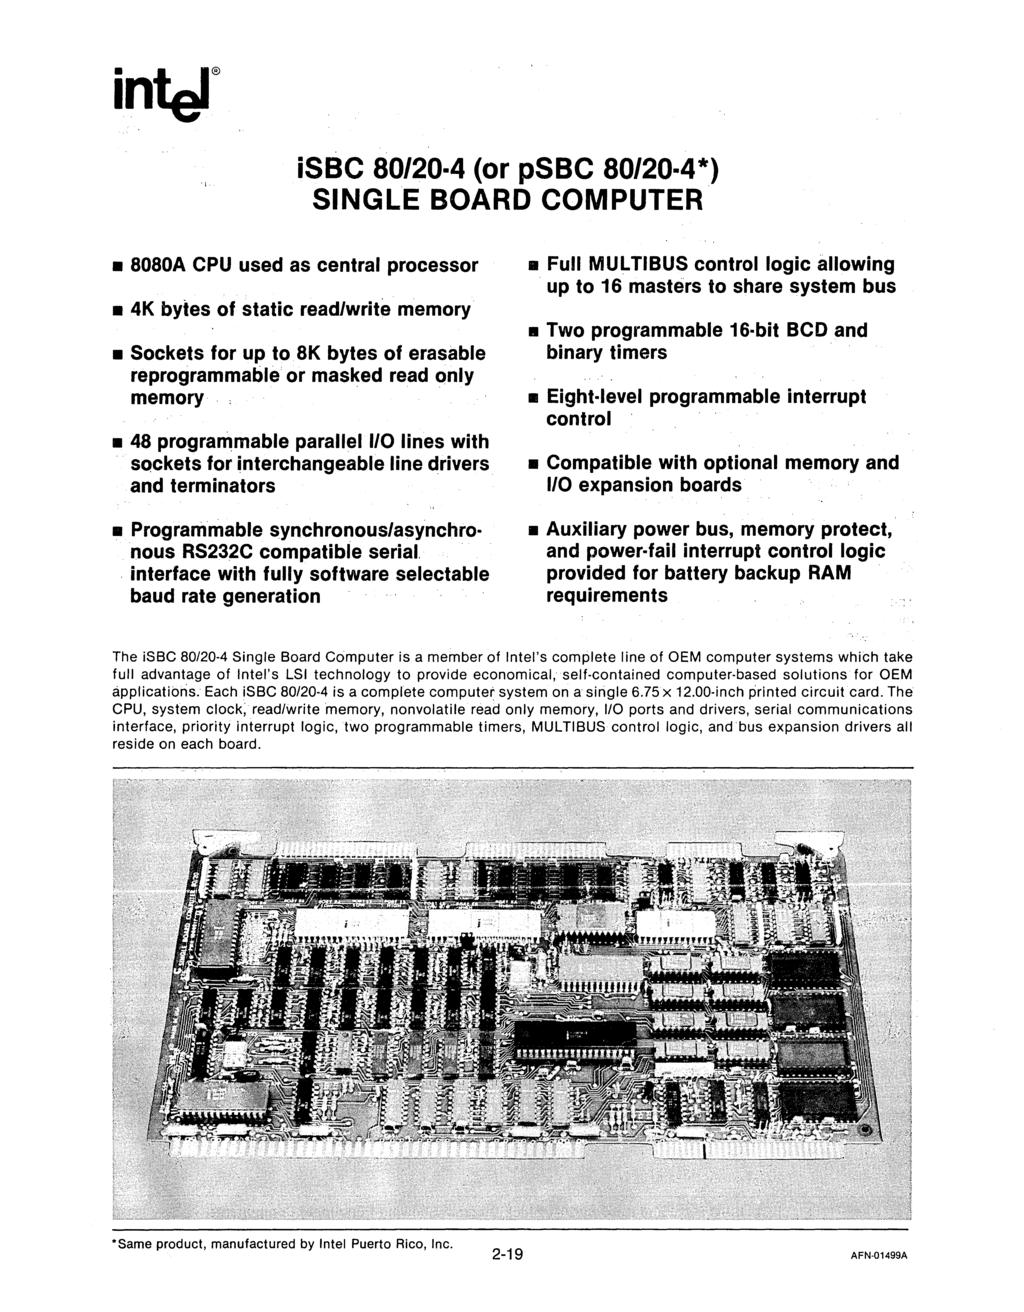 isbc 80/20-4 (or psbc 80/20-4*) SINGLE BOARD COMPUTER 8080A CPU used as central processor 4K bytes of static read/write memory Sockets for up to 8K bytes of erasable reprogram mabie or masked read